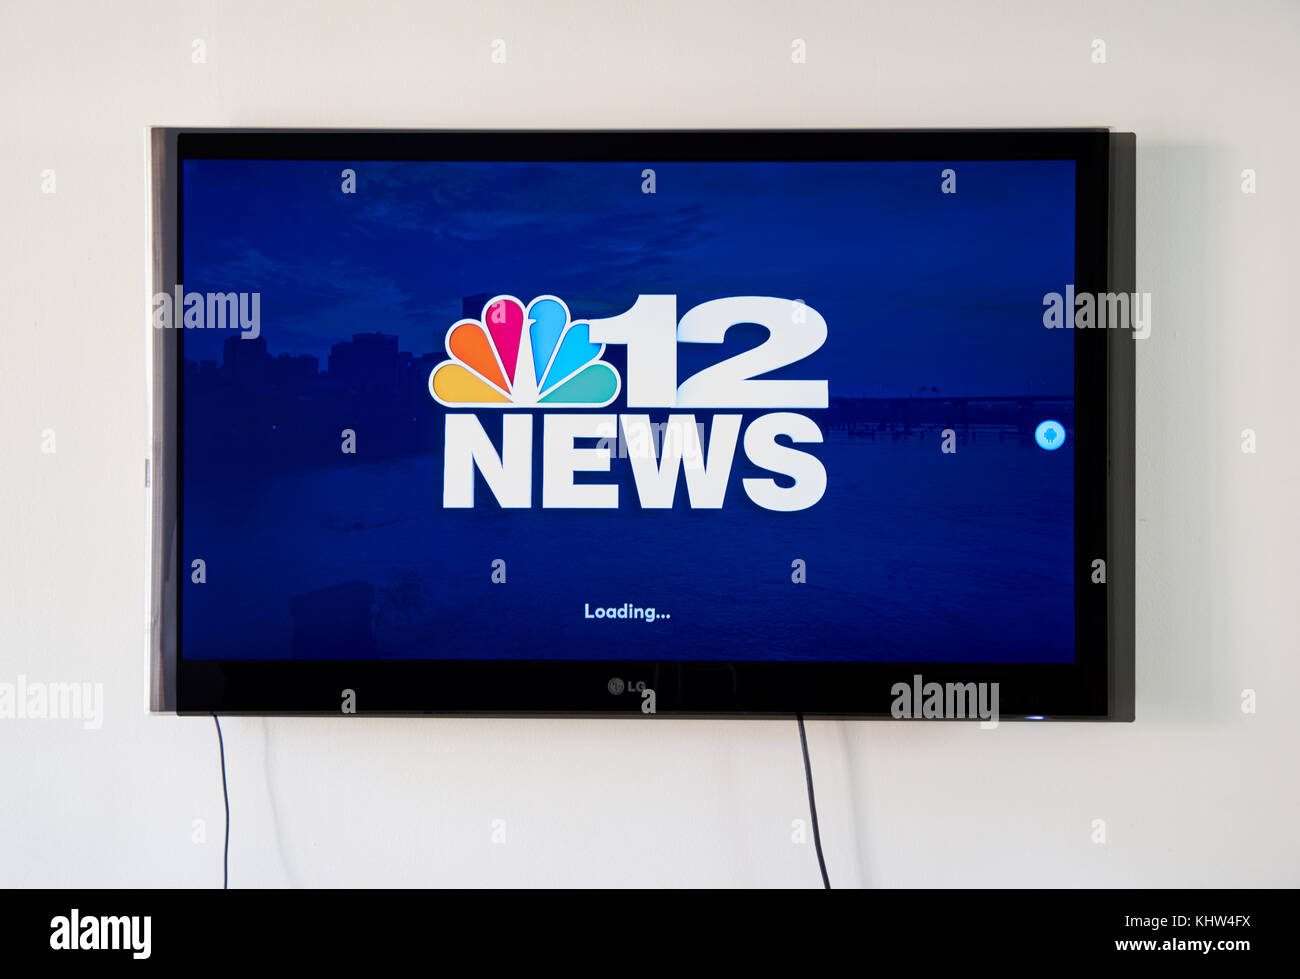 MONTREAL, CANADA - NOVEMBER 15, 2017: 12 News broadcasting app and logo on LG TV screen. WWBT is an NBC-affiliated television station licensed to Rich Stock Photo